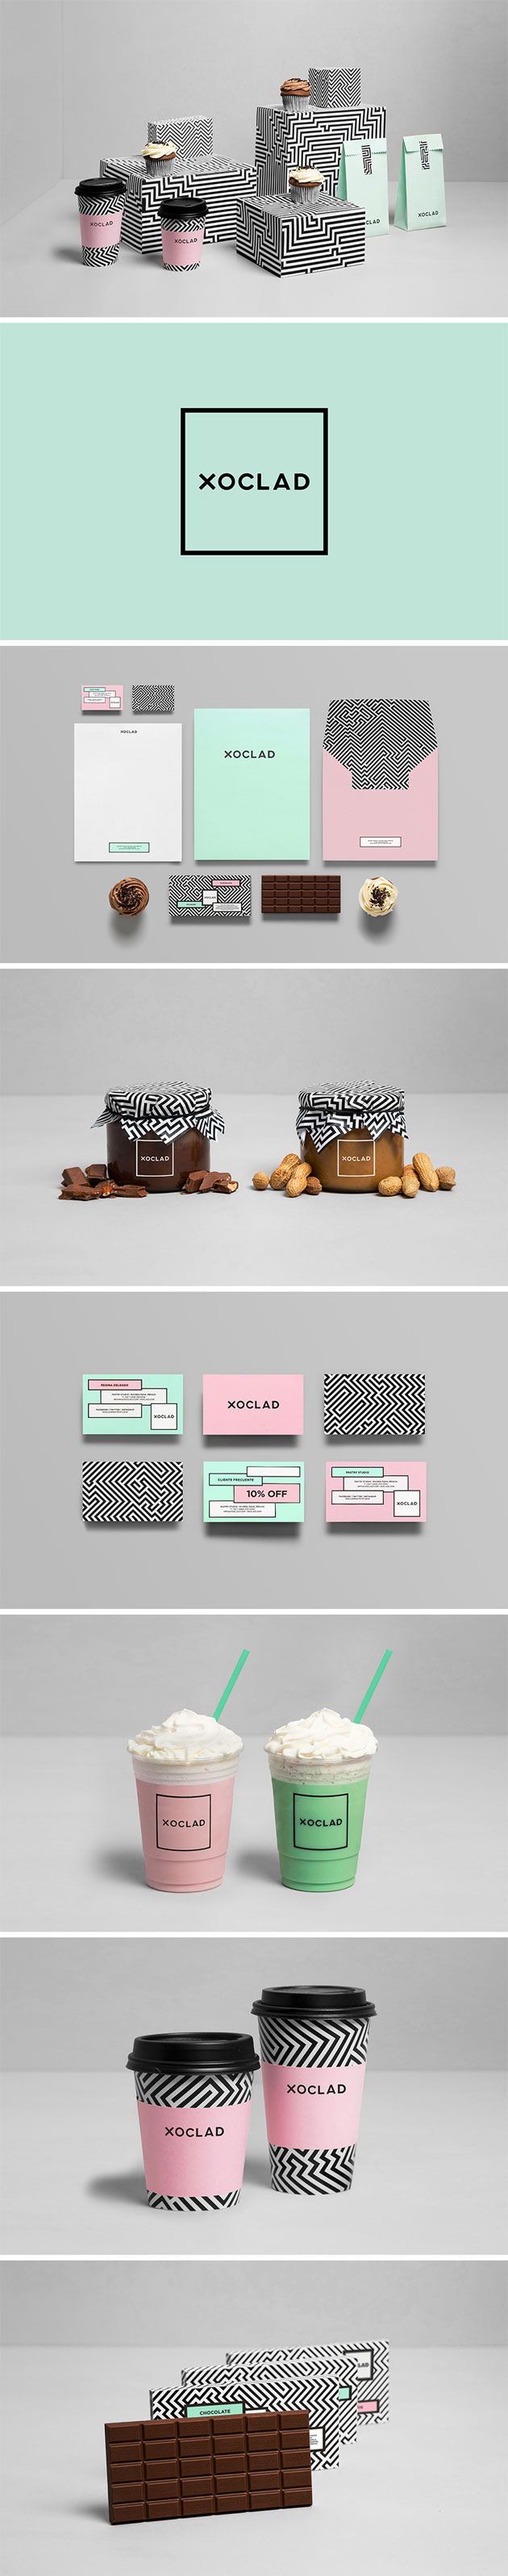 Xoclad branding by Anagrama